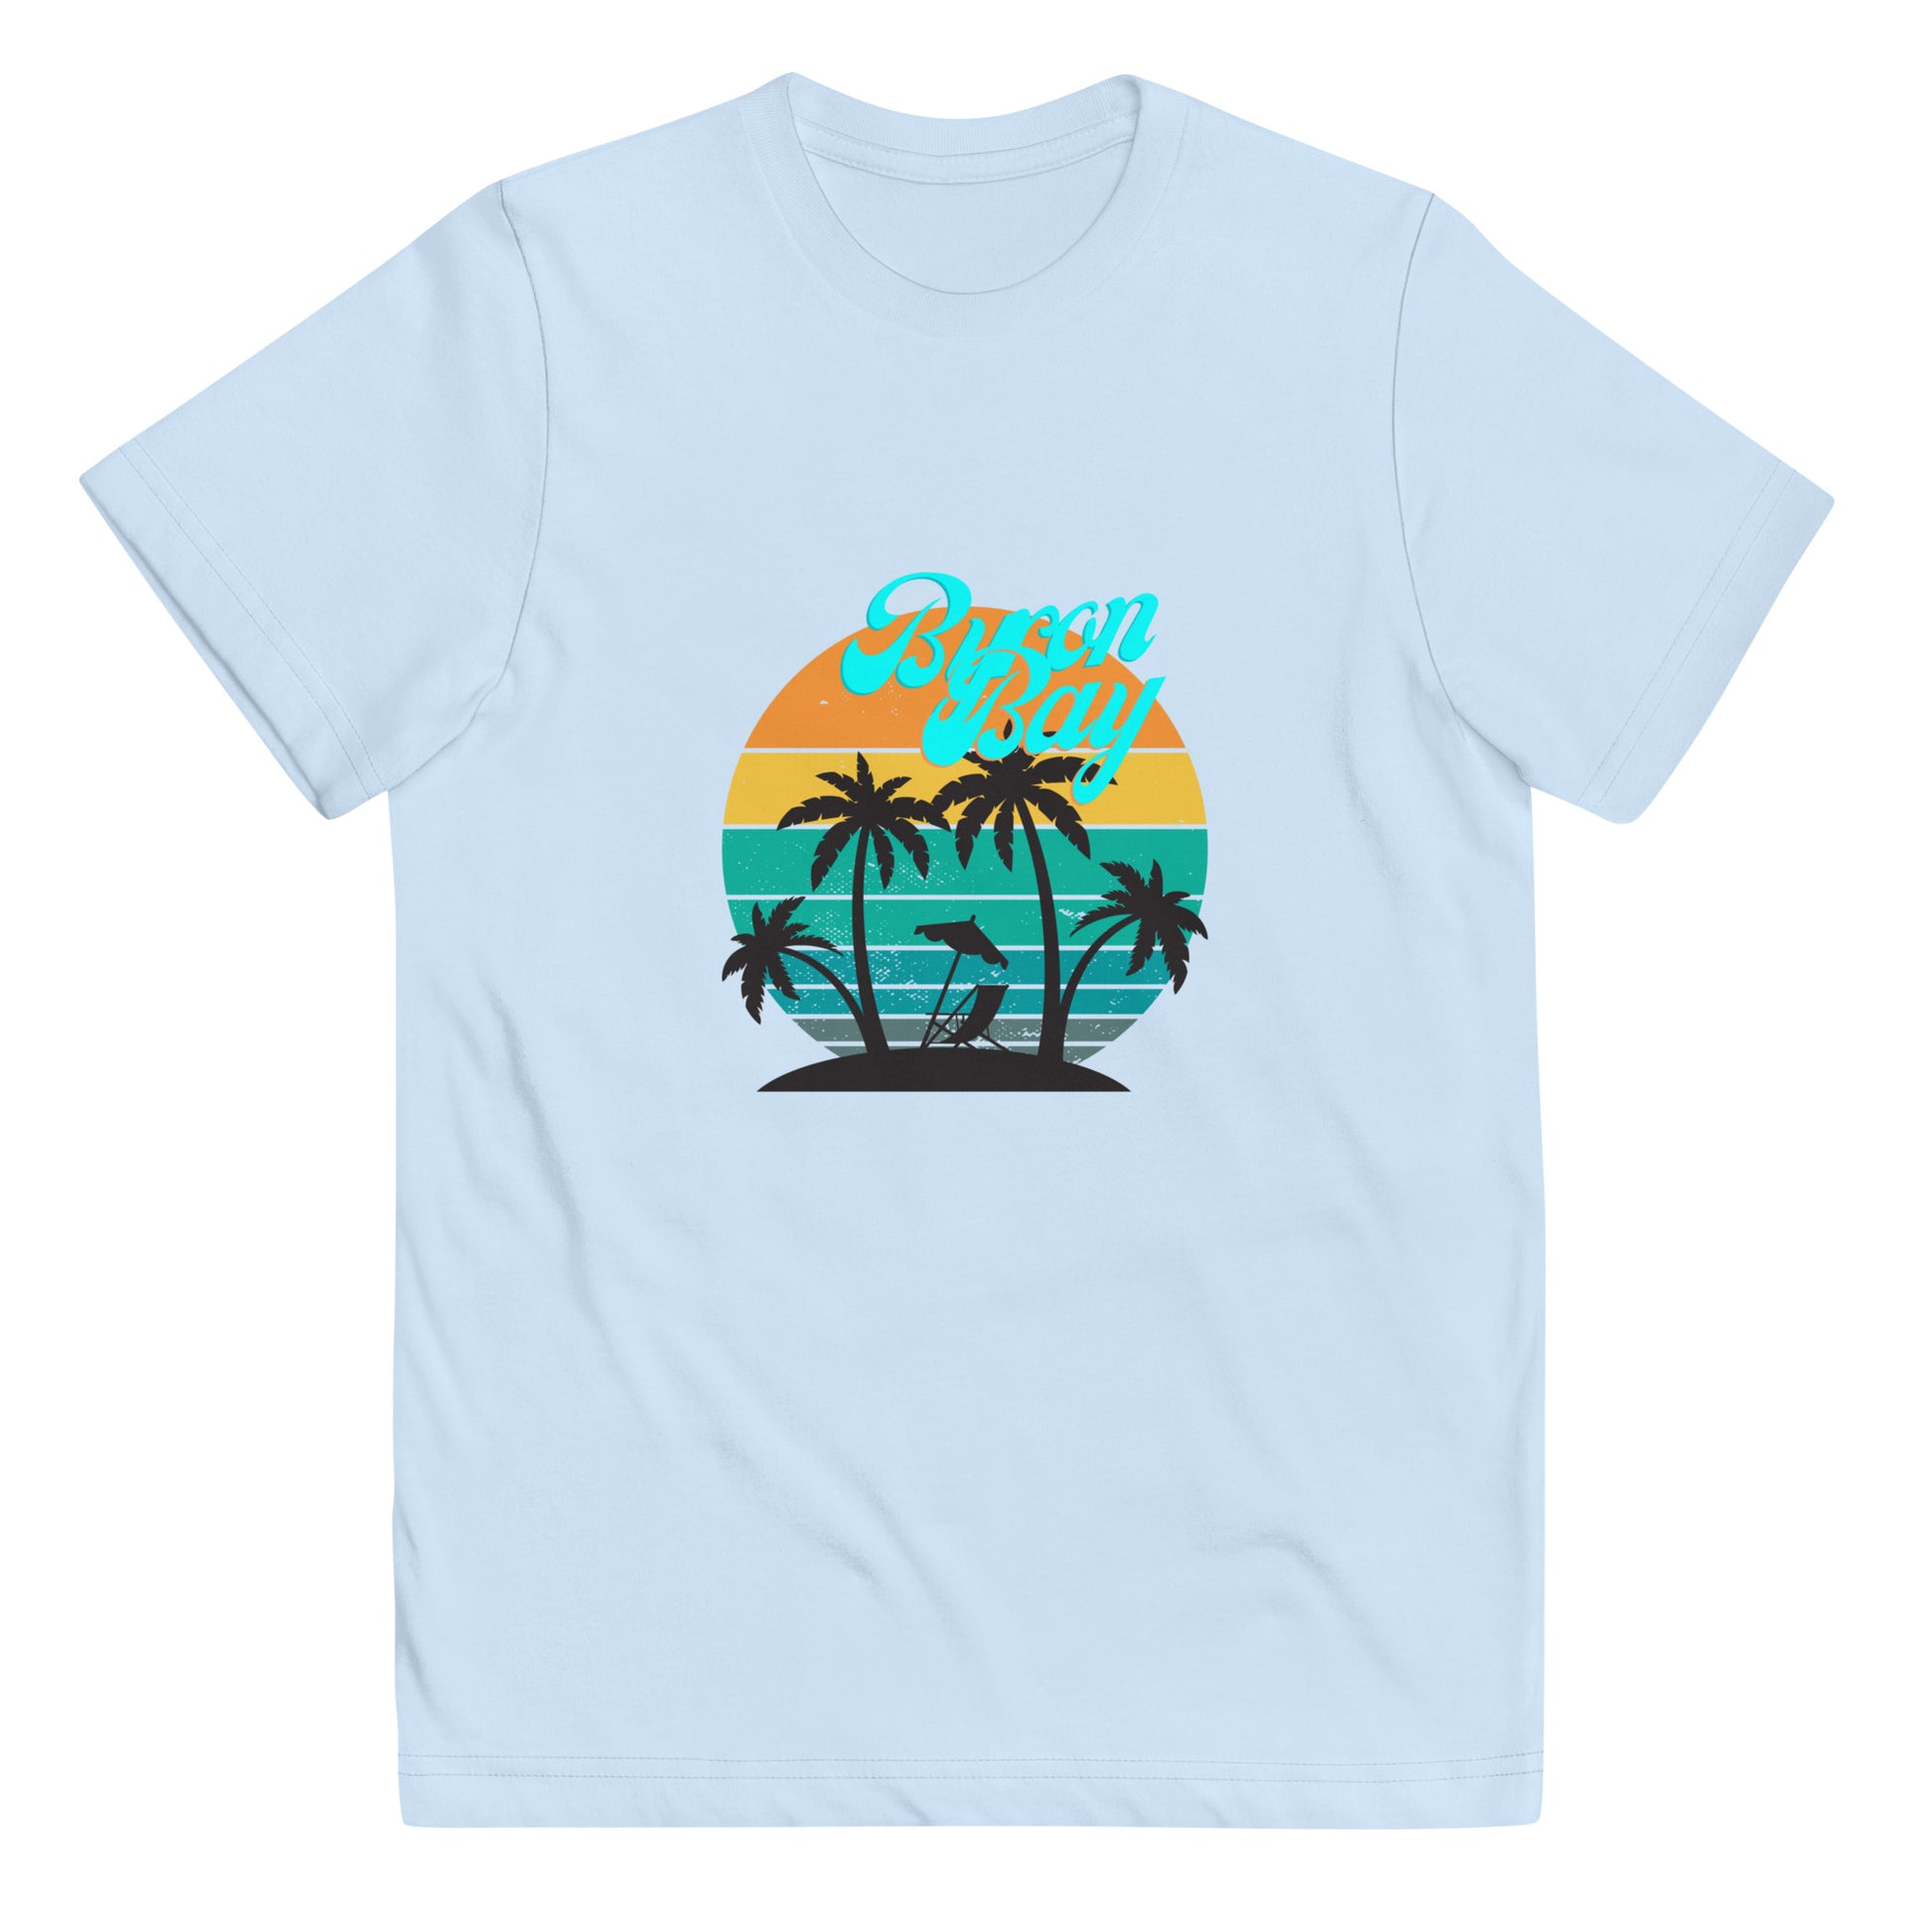  Kids T-Shirt - Light Blue - Front flat lay view - Byron Bay design on front - Genuine Byron Bay Merchandise | Produced by Go Sea Kayak Byron Bay 